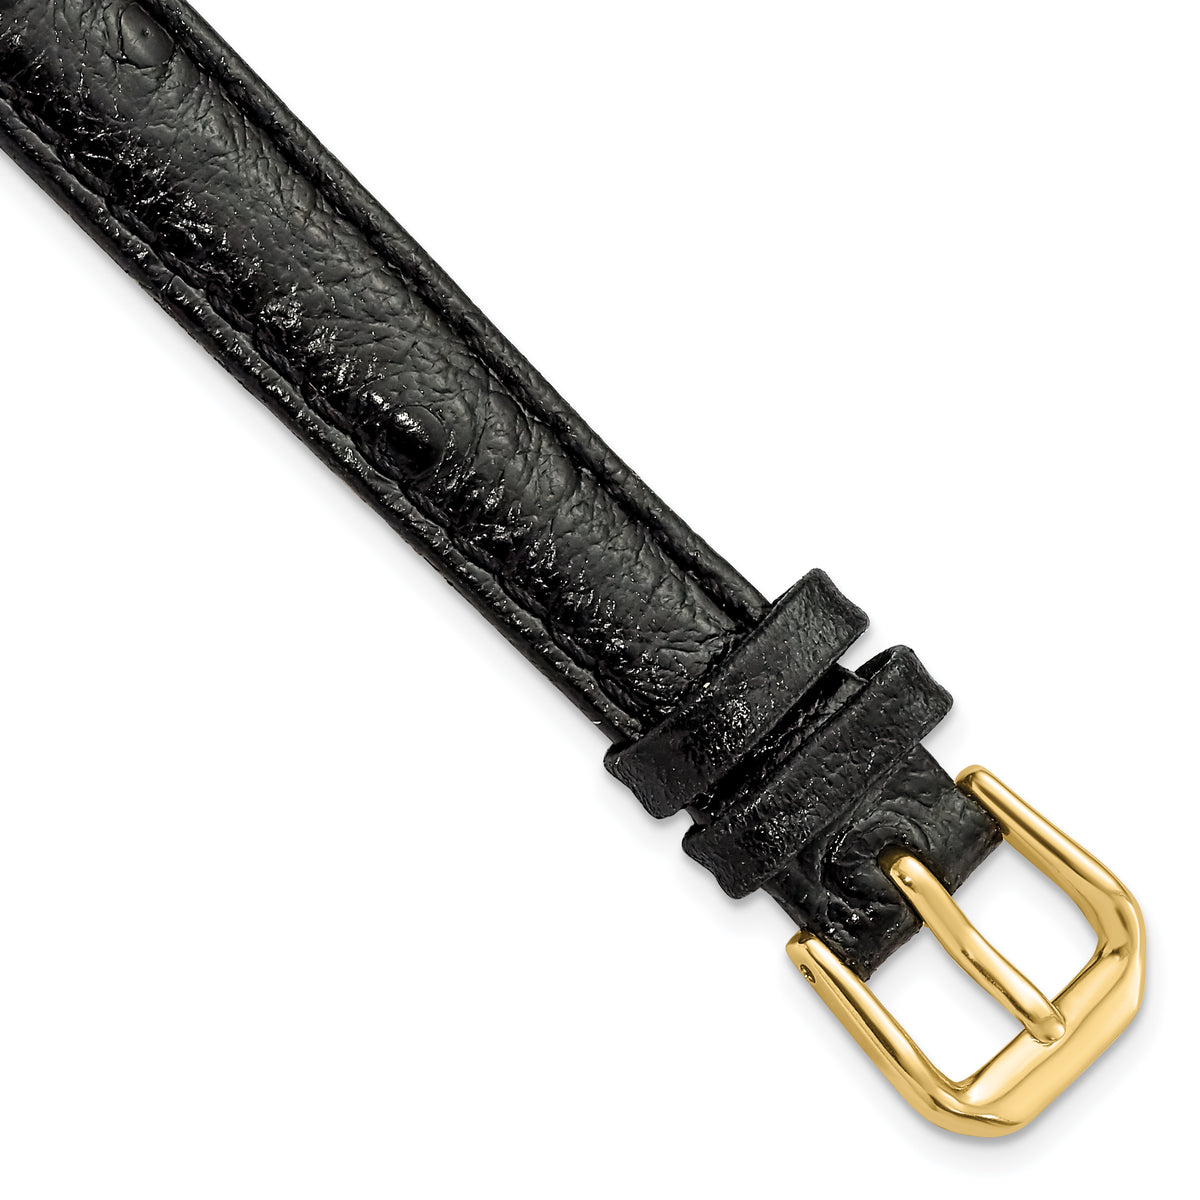 DeBeer 12mm Black Ostrich Grain Leather with Gold-tone Buckle 6.75 inch Watch Band